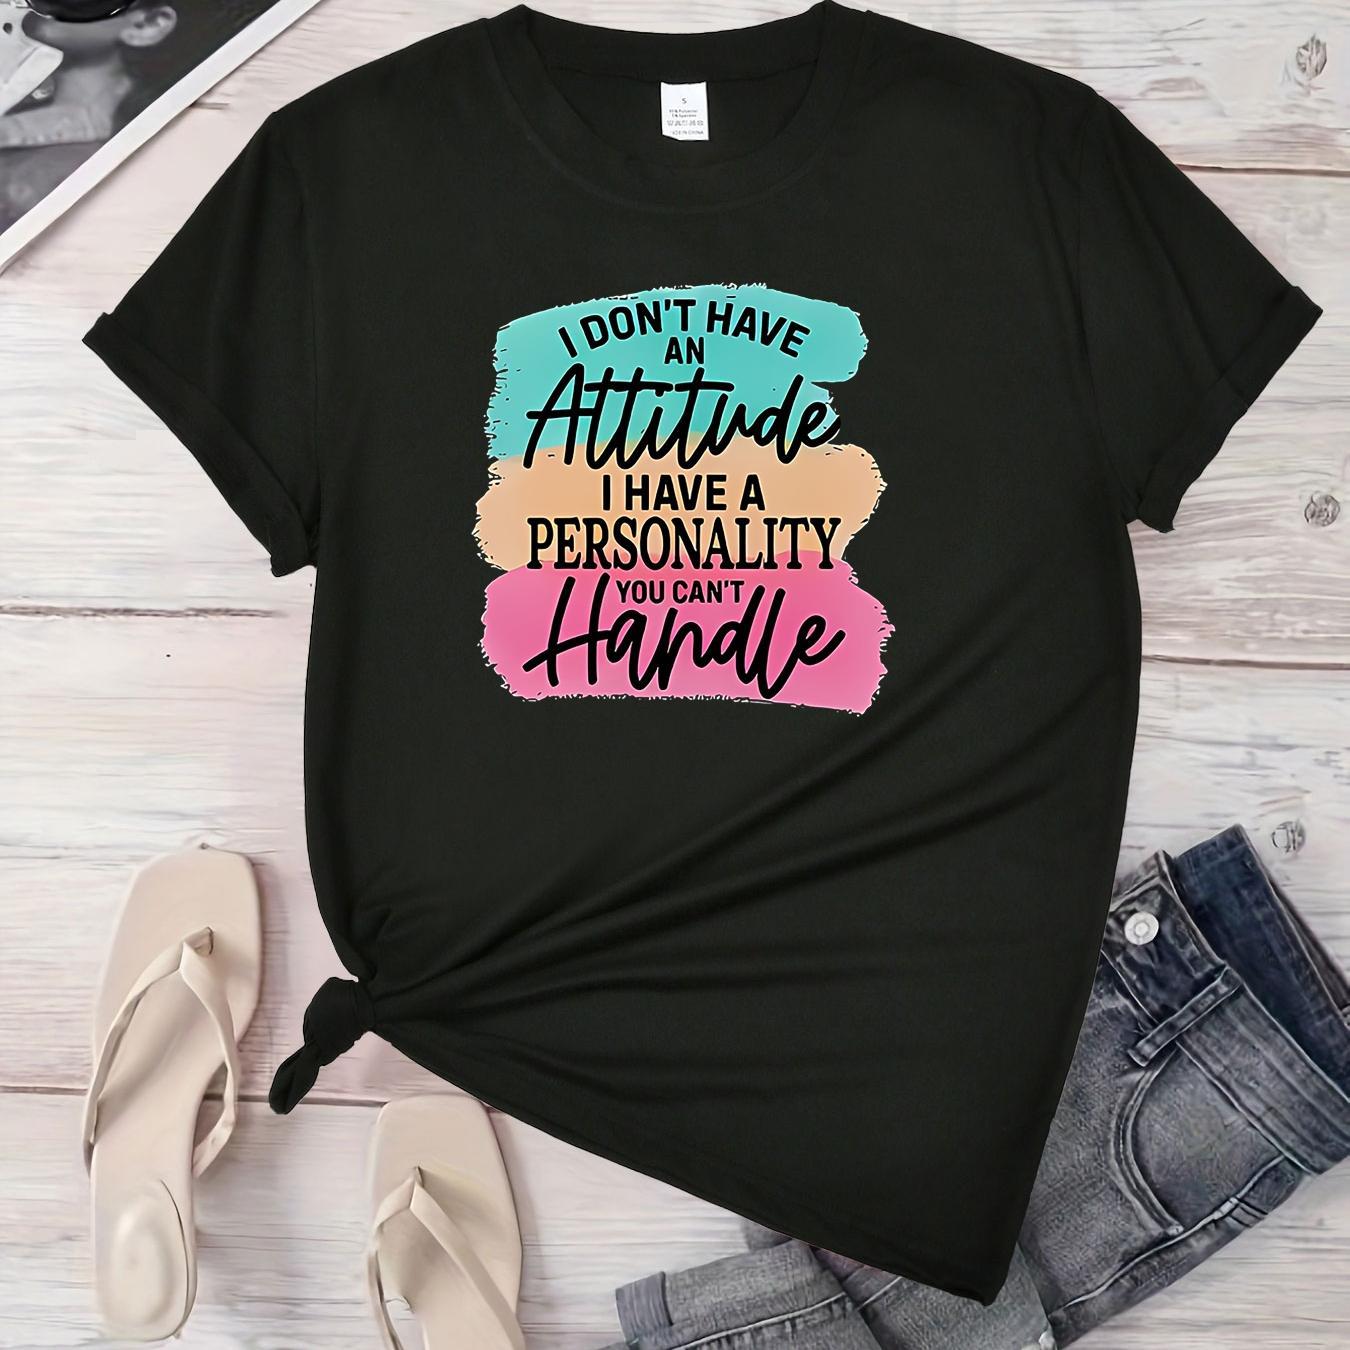 

Women's Short Sleeve T-shirt, "i Don't Have Attitude I Have A Personality" Print, Round Neck, Casual Style Top For Spring/summer/autumn, Women's Clothing.